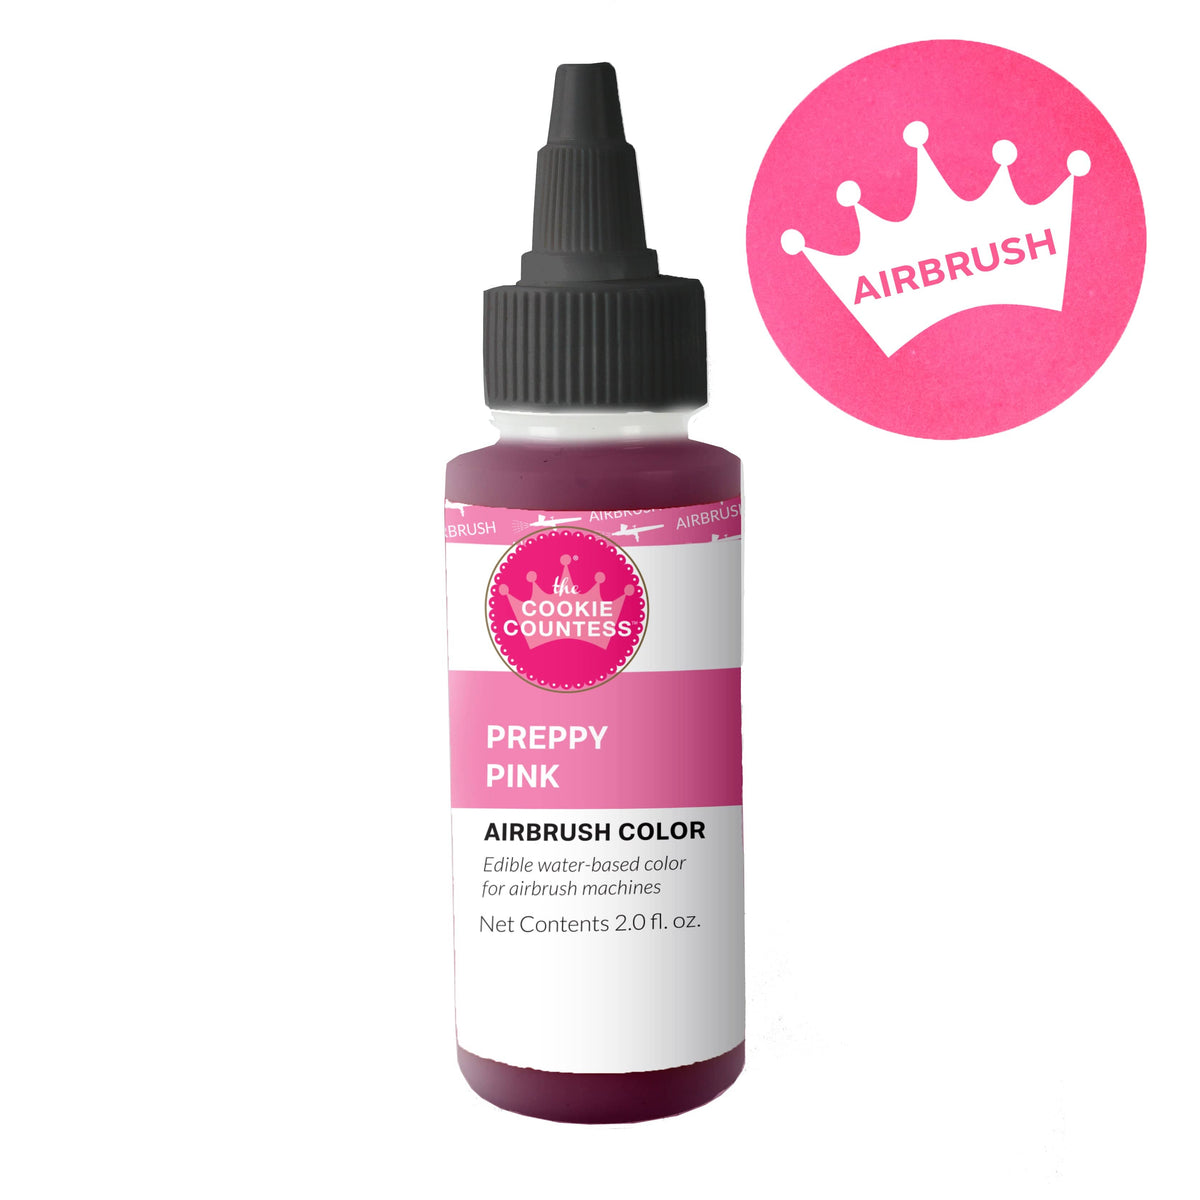 Cookie Countess - Preppy Pink edible airbrush color 2oz — The